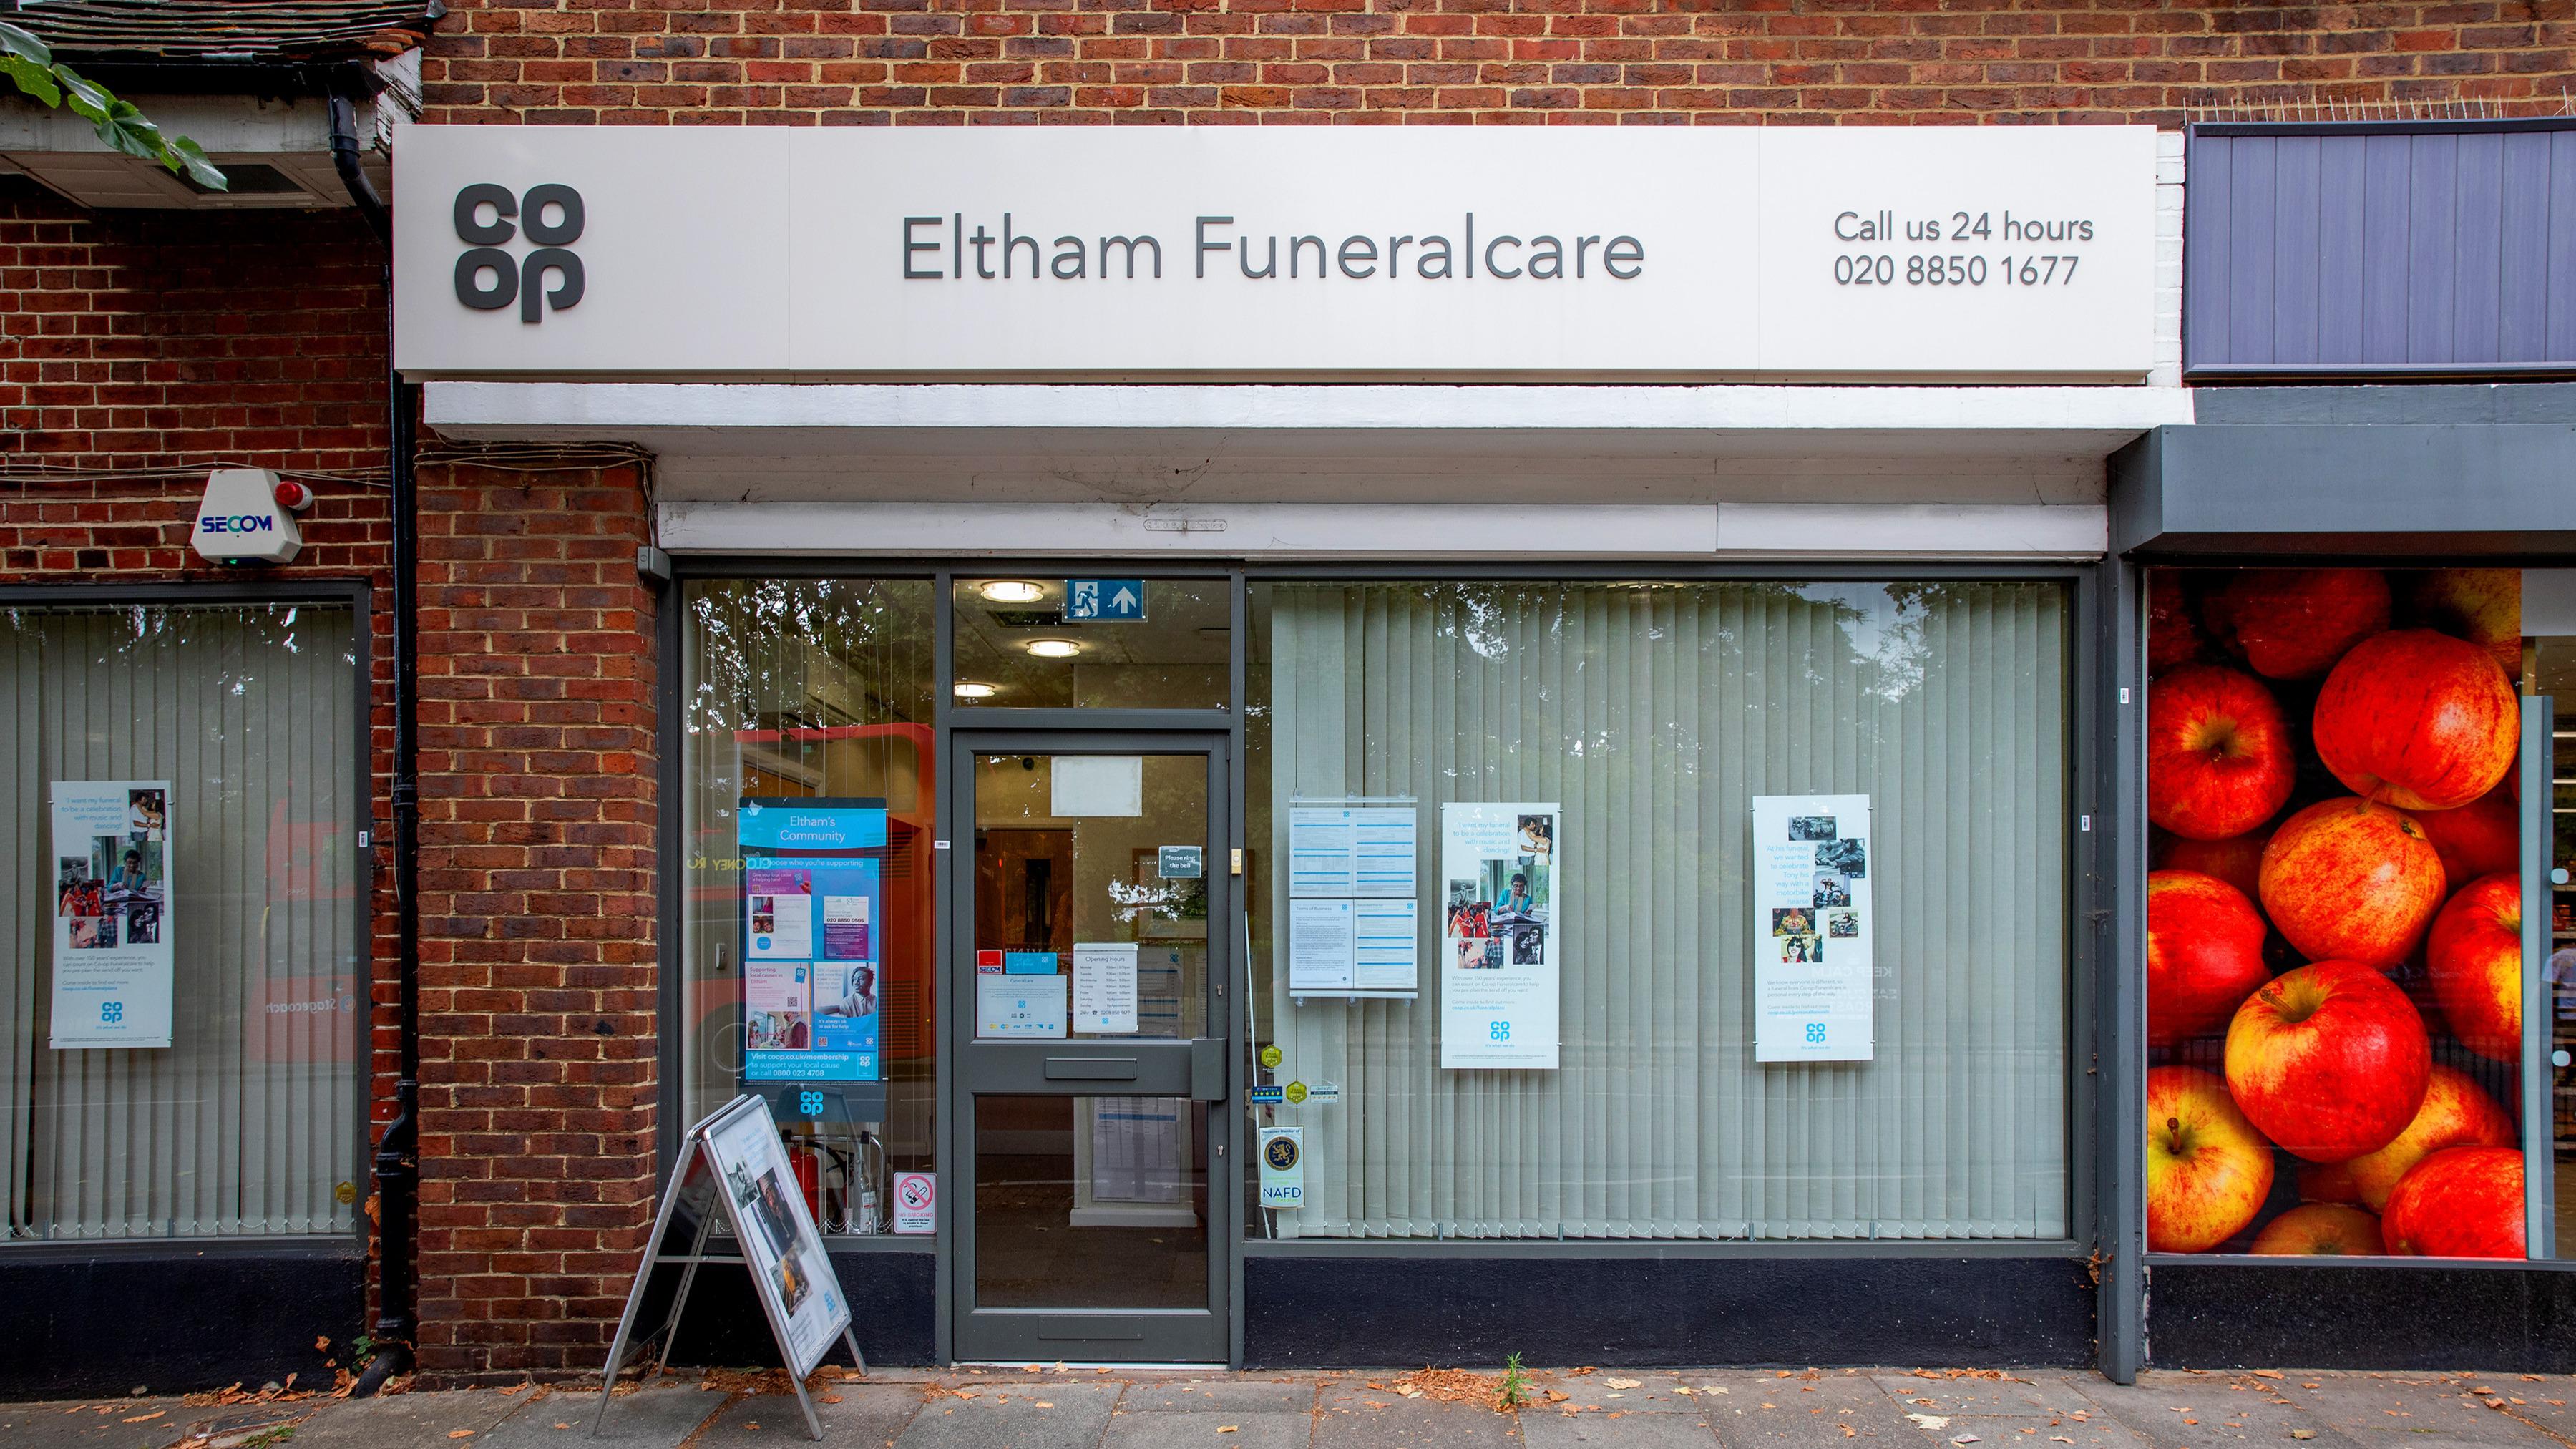 Images Eltham Funeralcare